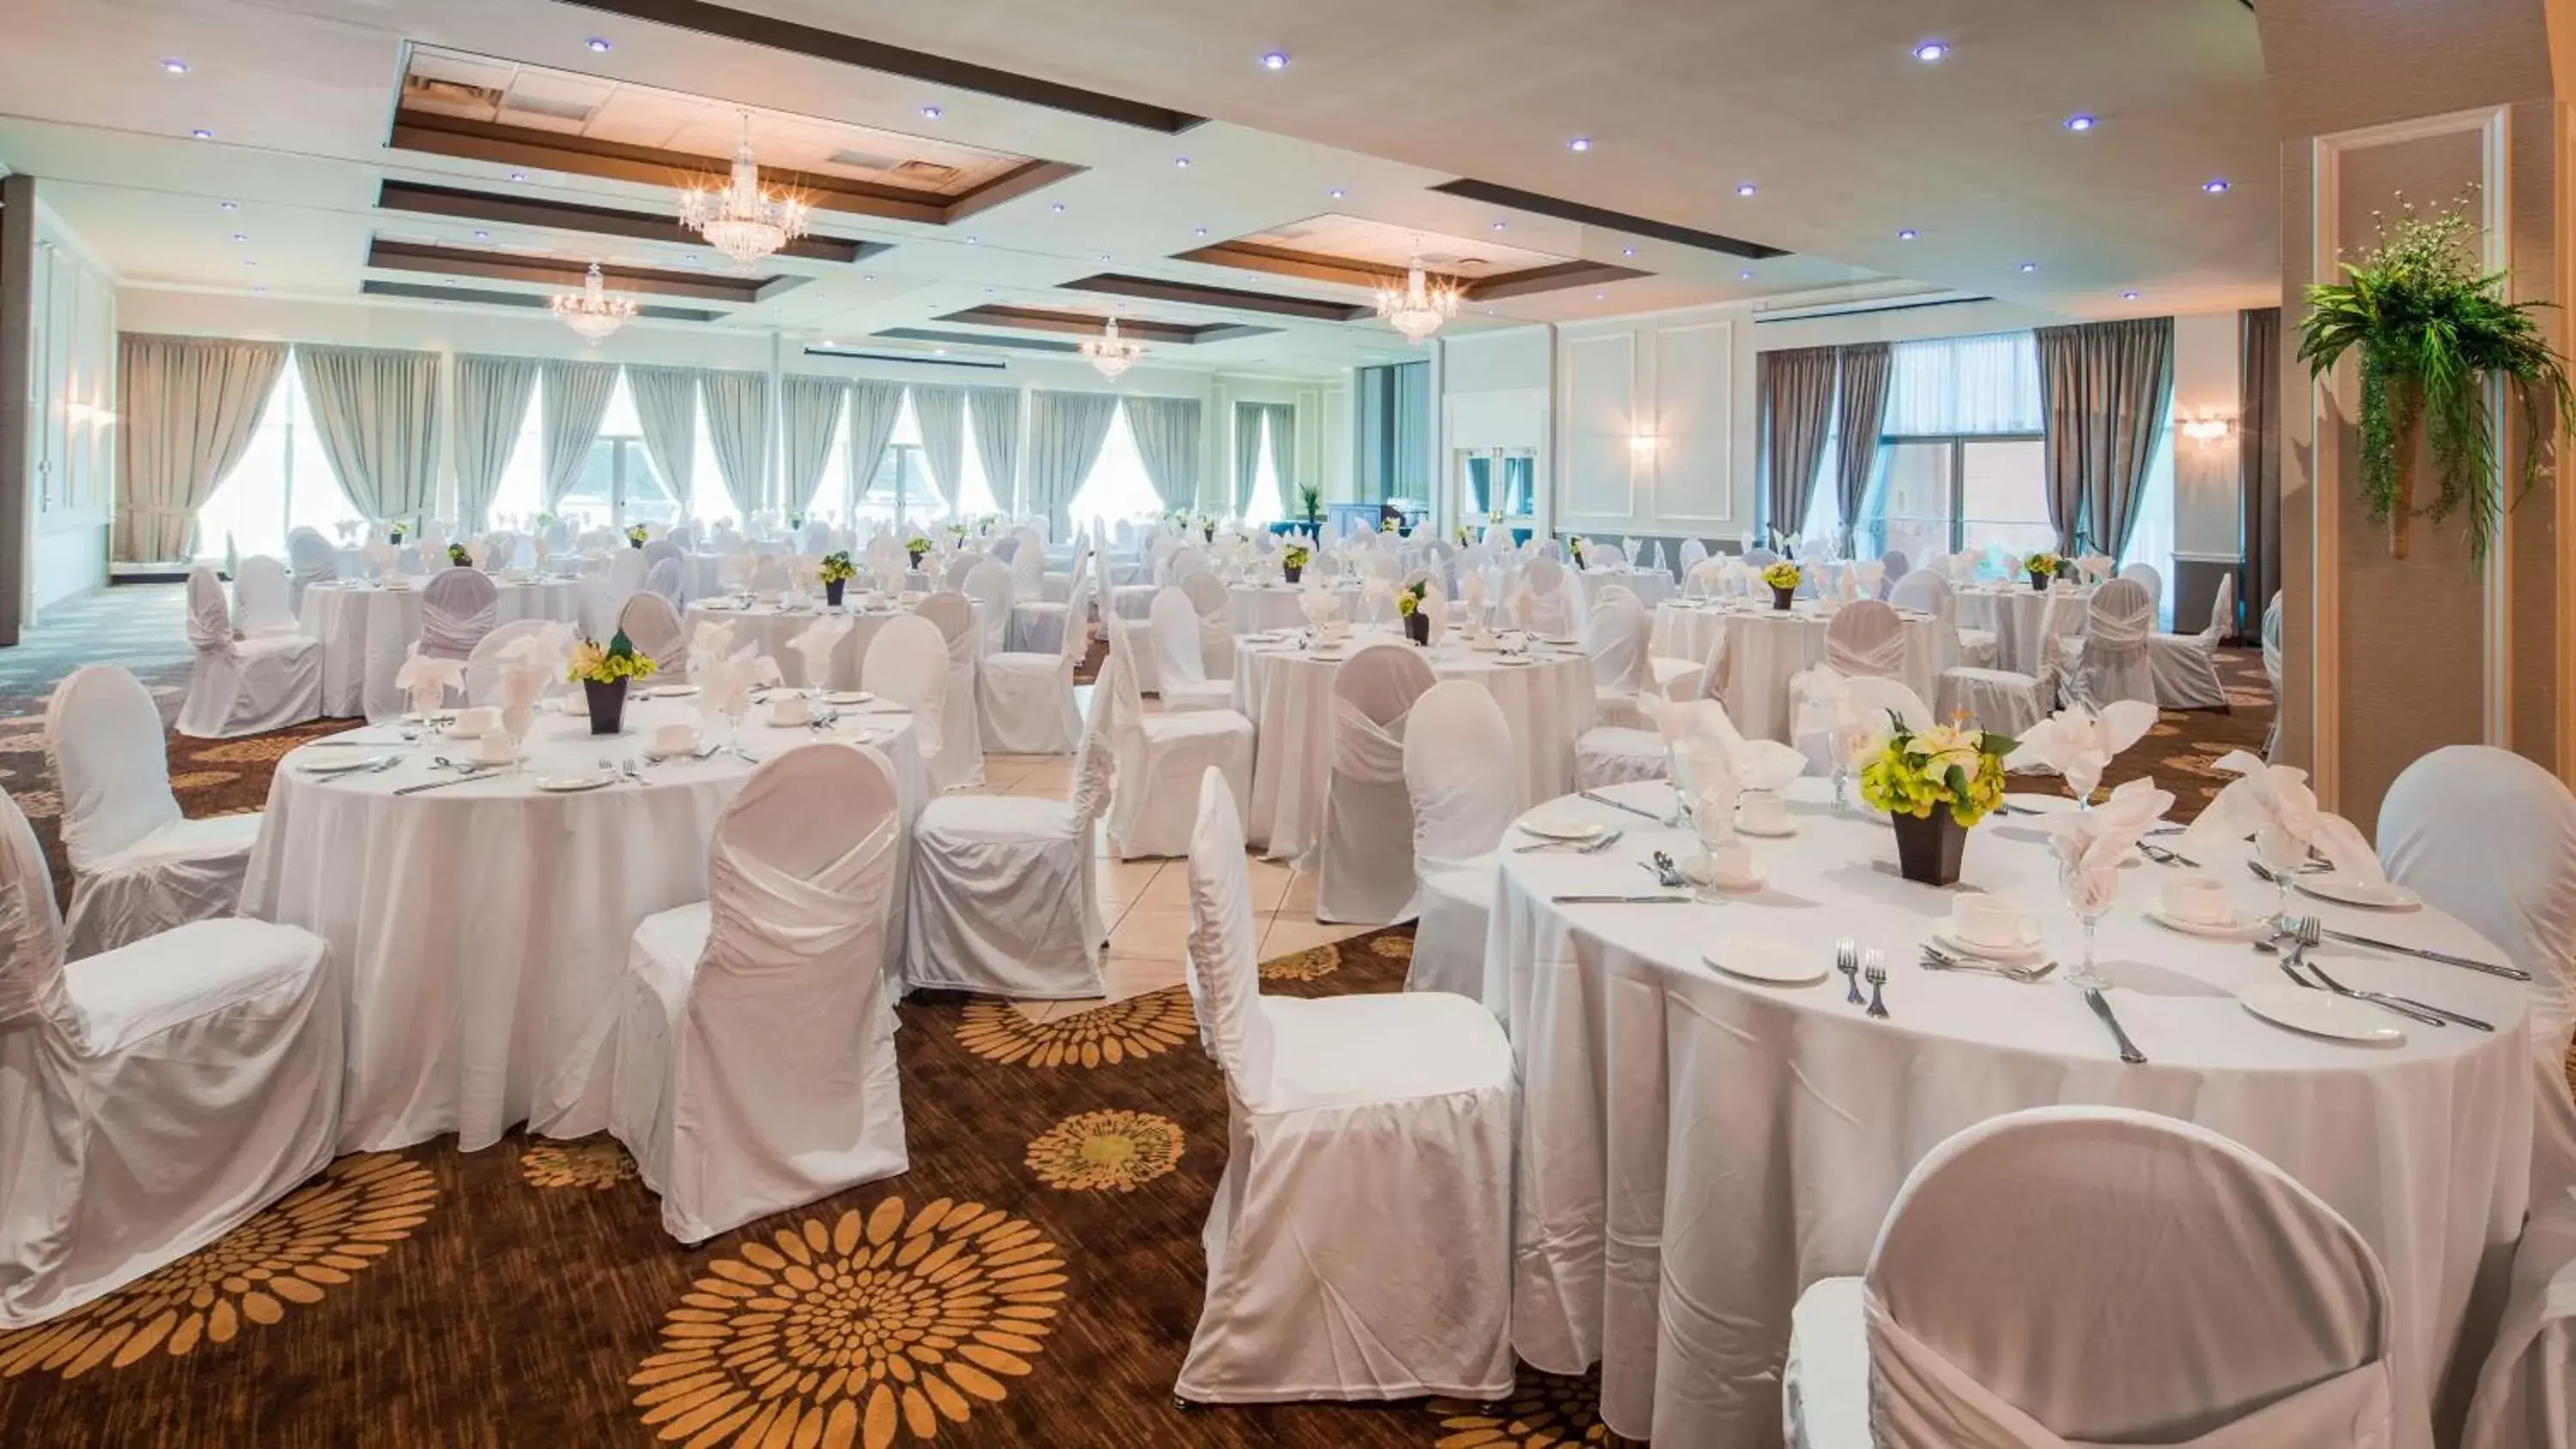 On site, Banquet Facilities in Best Western PLUS The Arden Park Hotel